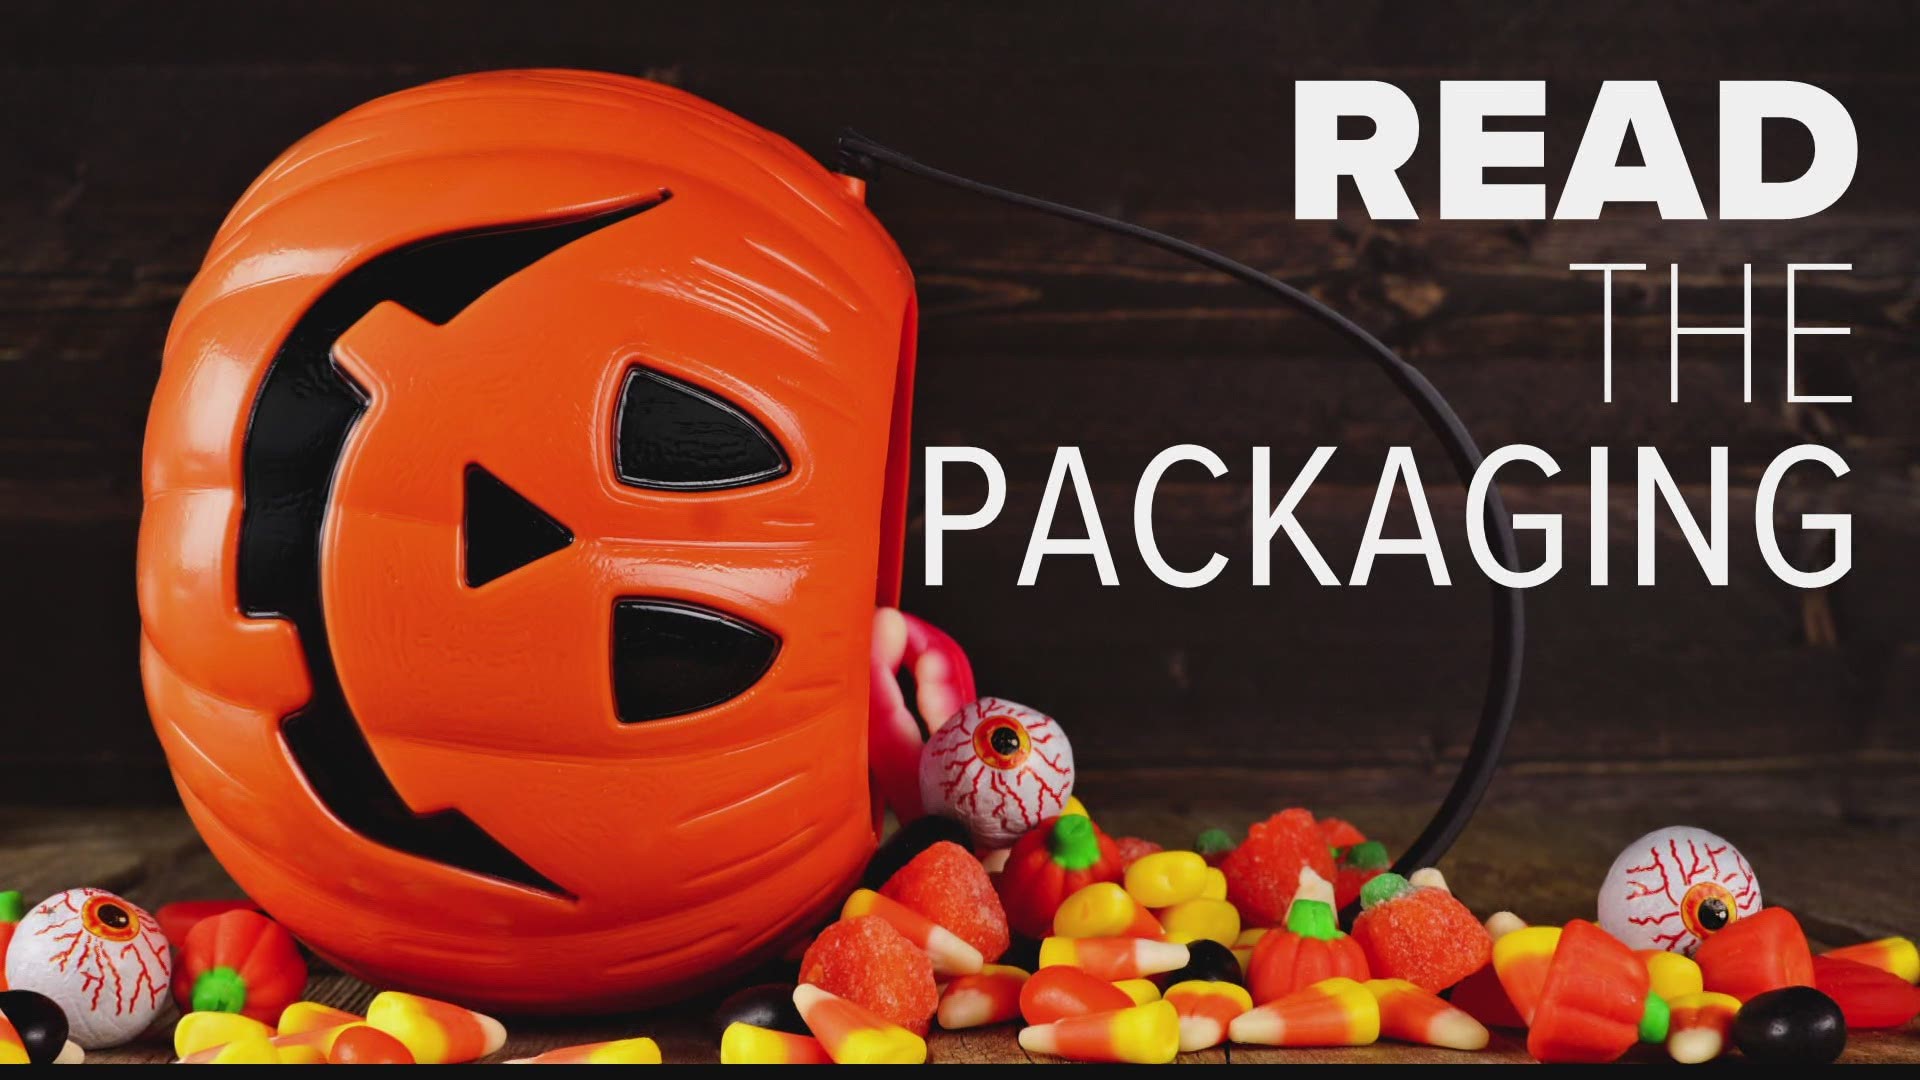 Police are urging parents to be on the lookout for Halloween candy that may not be what it appears.